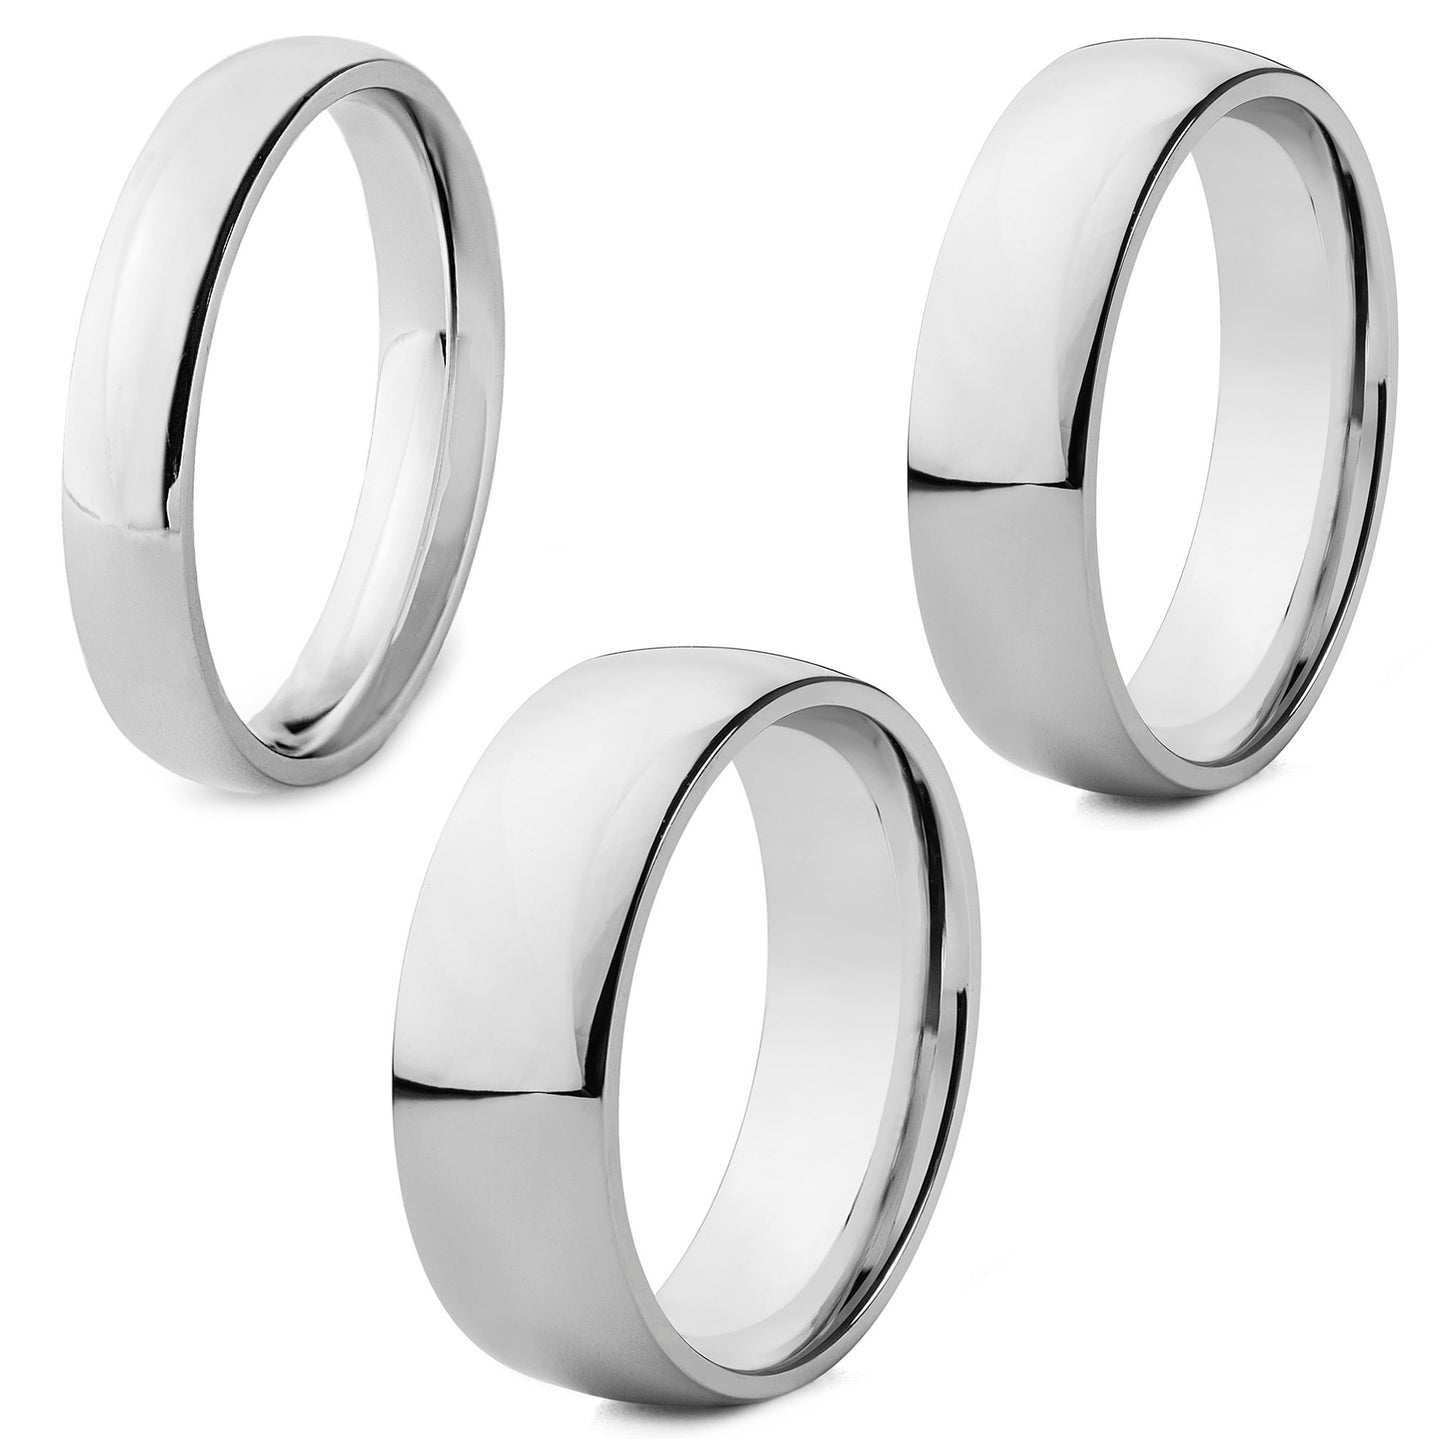 Unisex 100 Piece Box Ring Set Polished Domed Wedding Band Rings (4mm, 6mm and 8mm)